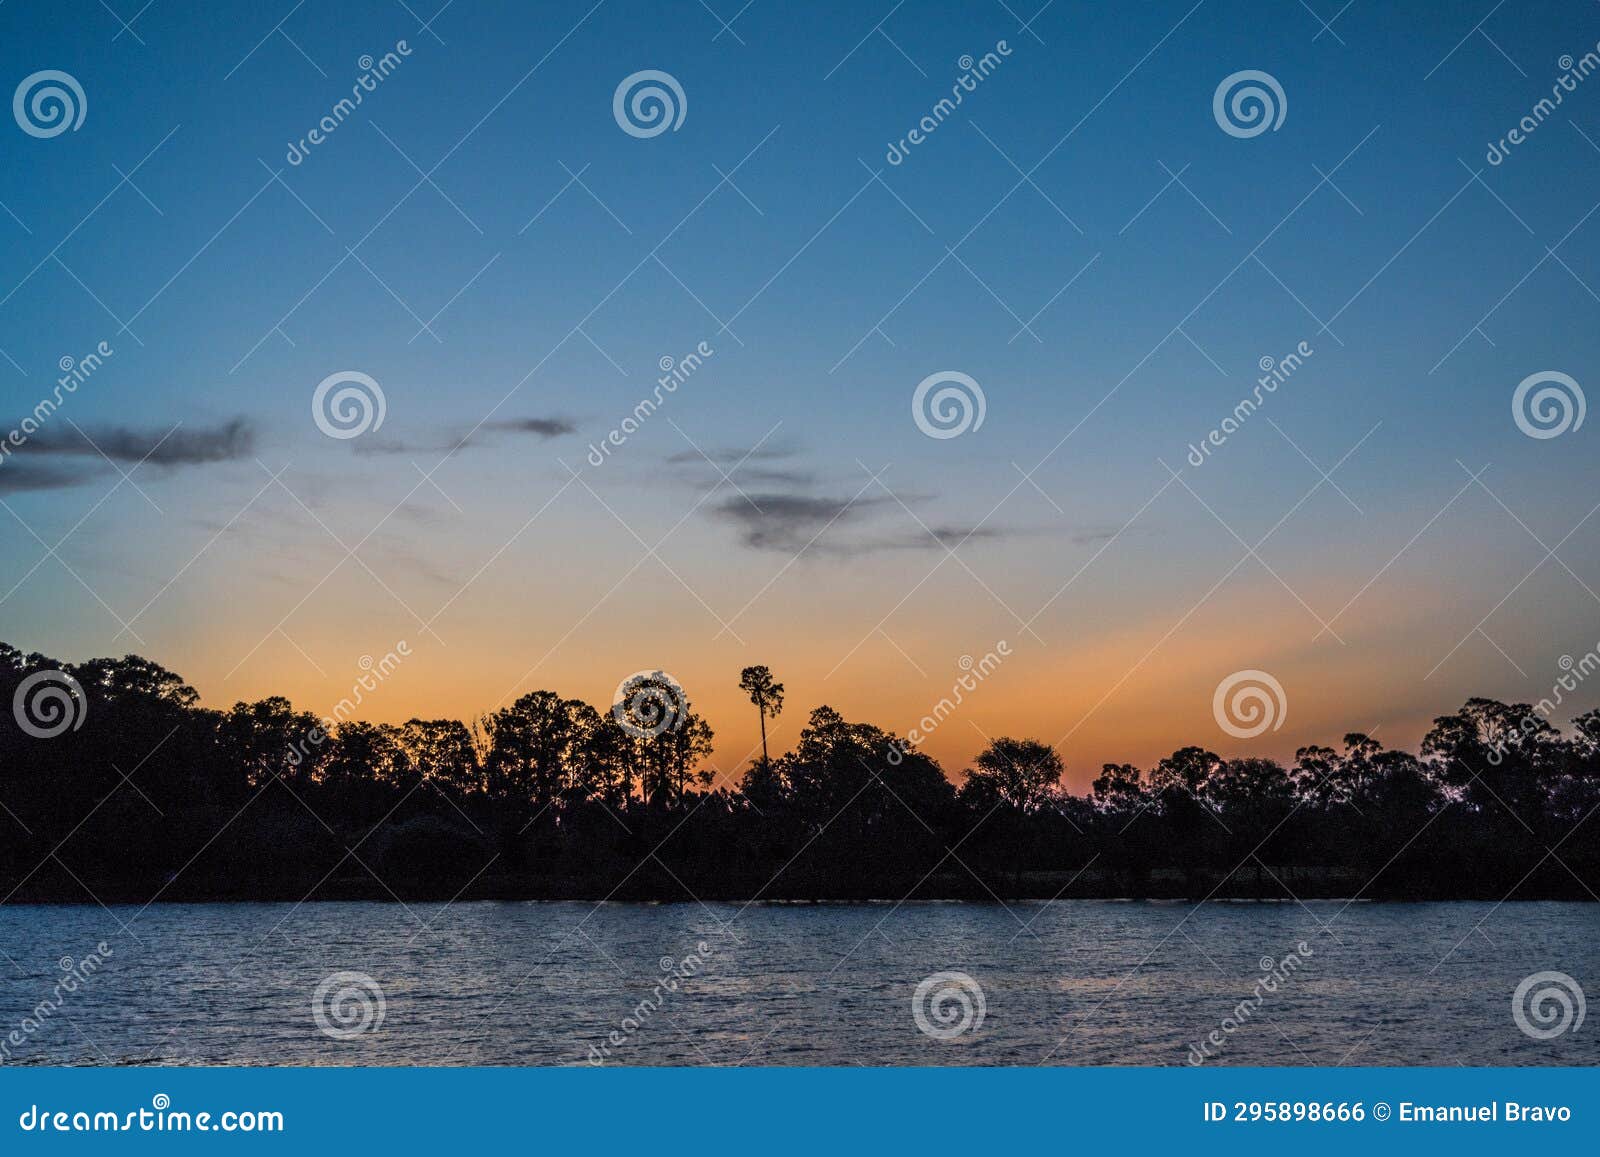 travel to a portion of river with a natural scenery of sunset over a dock with lights